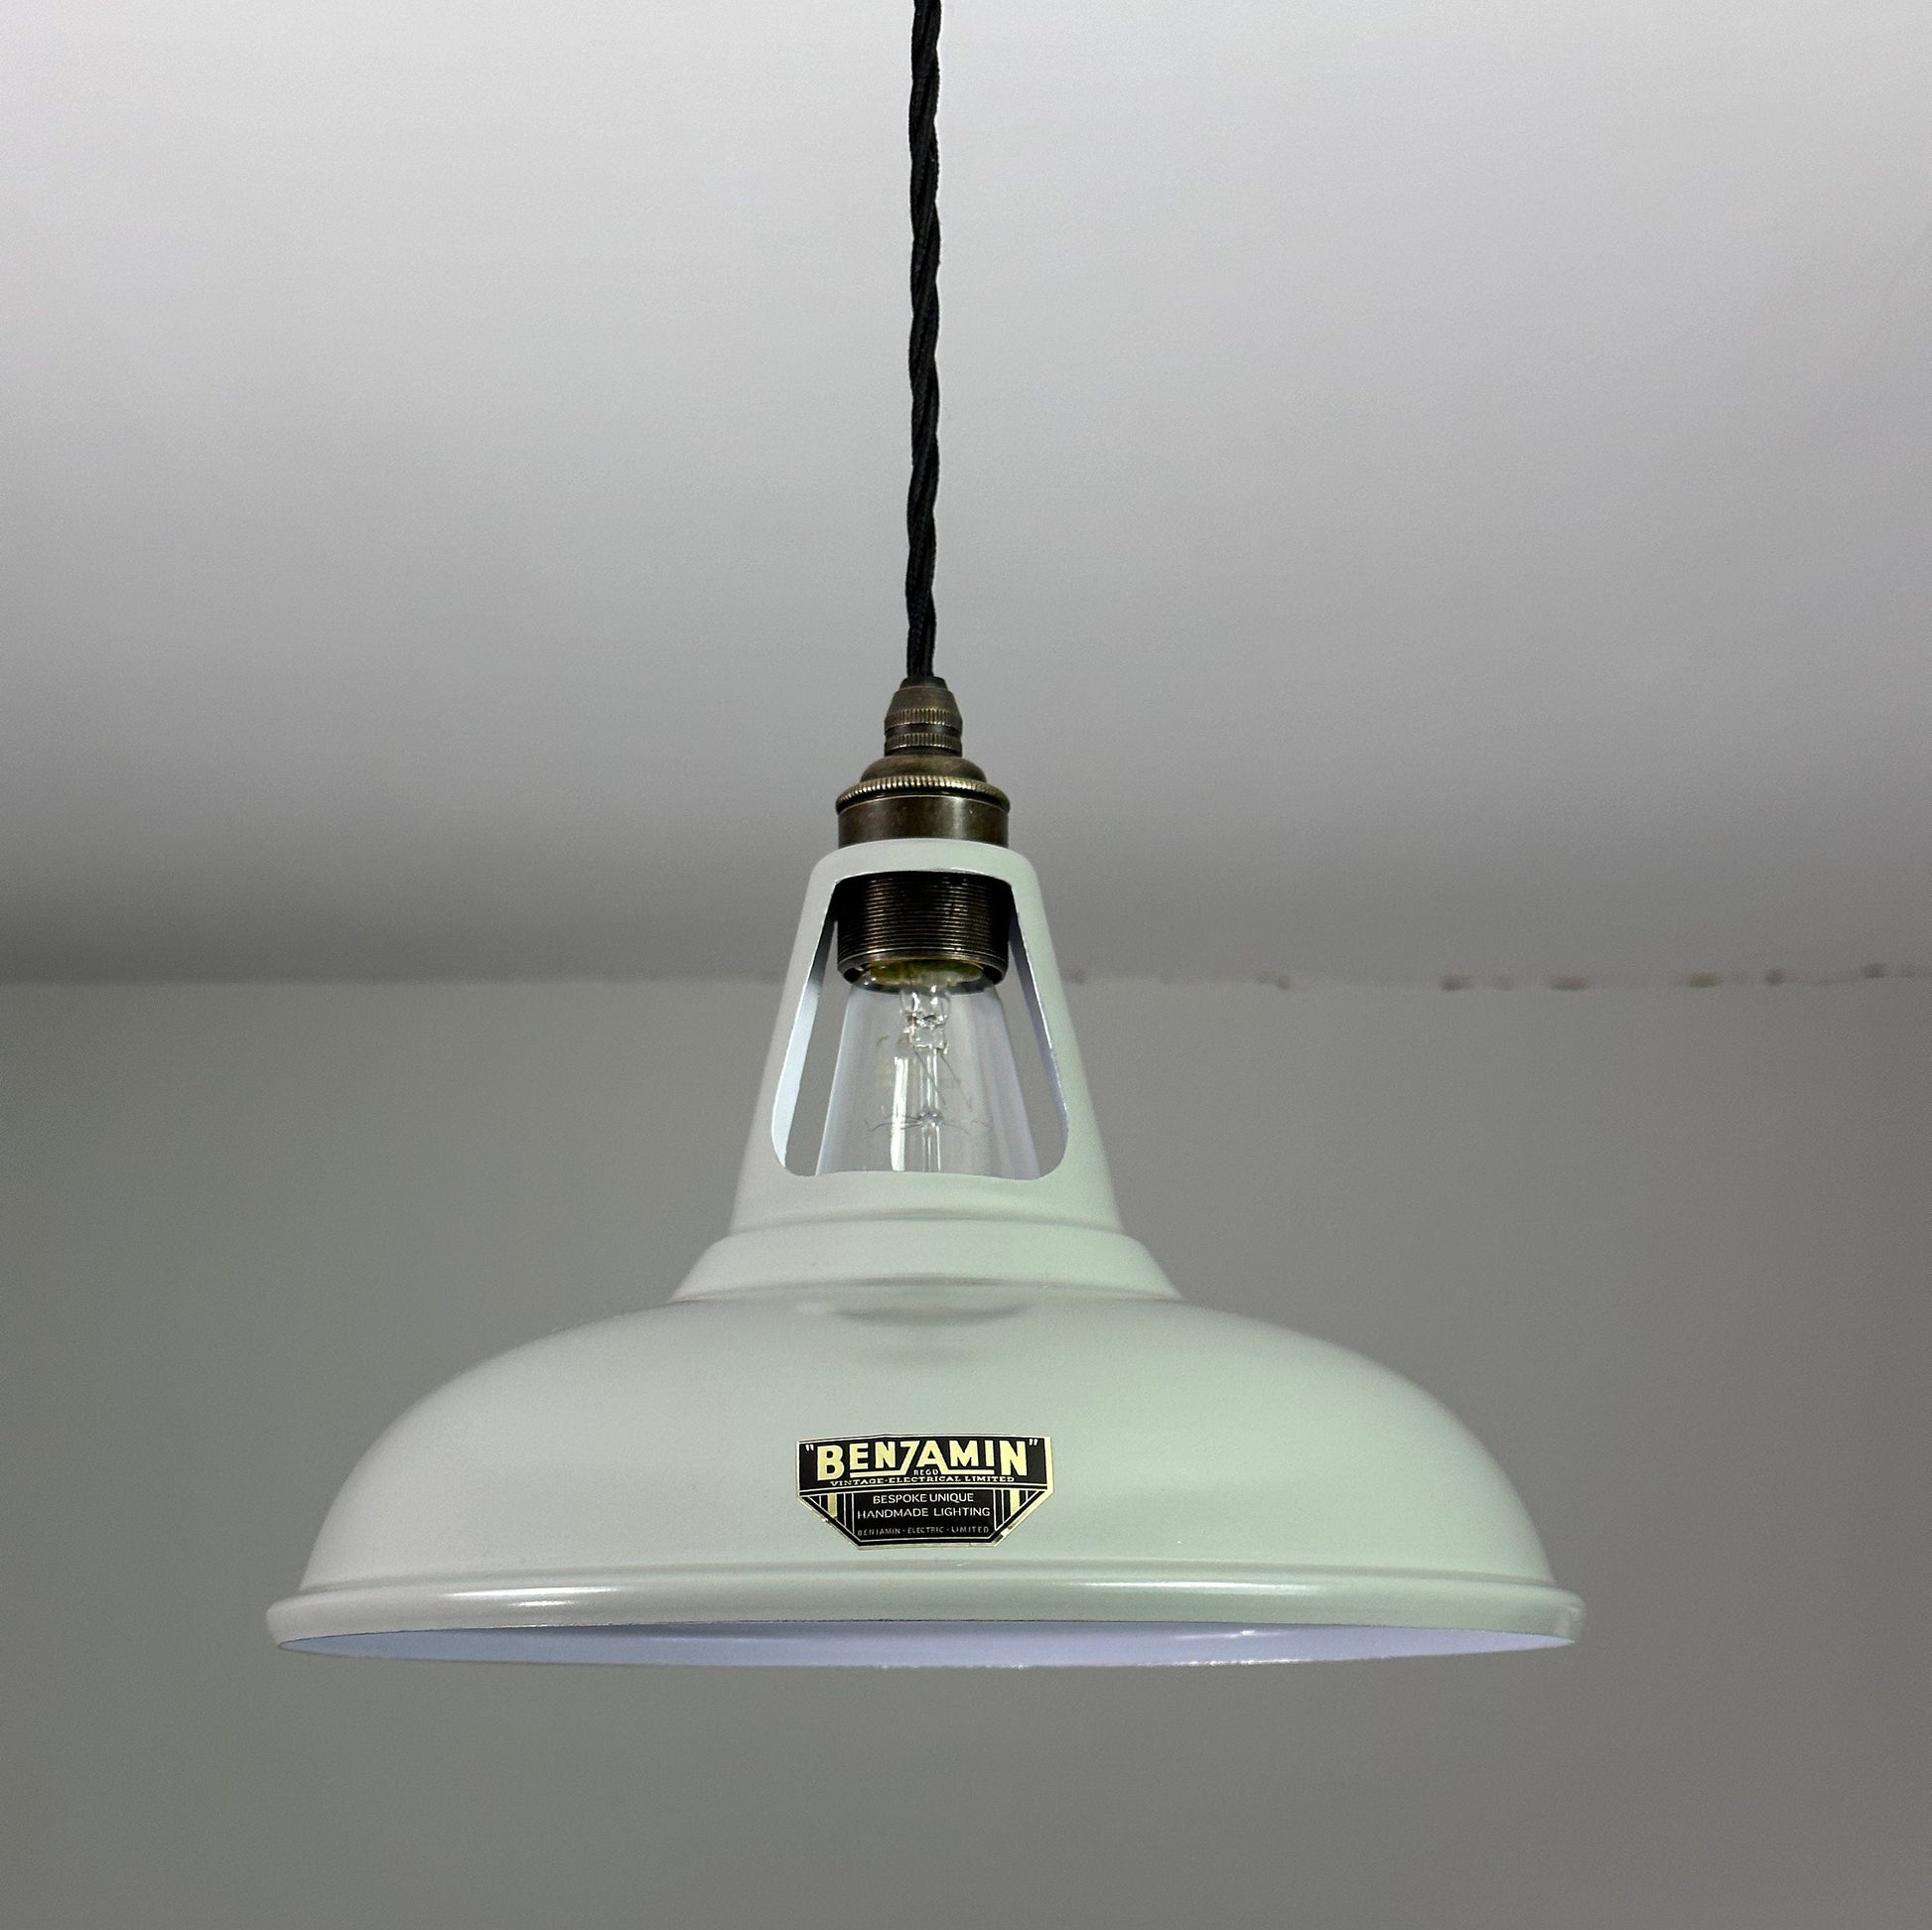 Cawston ~ Grey Solid Shade Slotted DesignPendant Set Light | Ceiling Dining Room | Kitchen Table | Vintage Filament Bulb 11 Inch